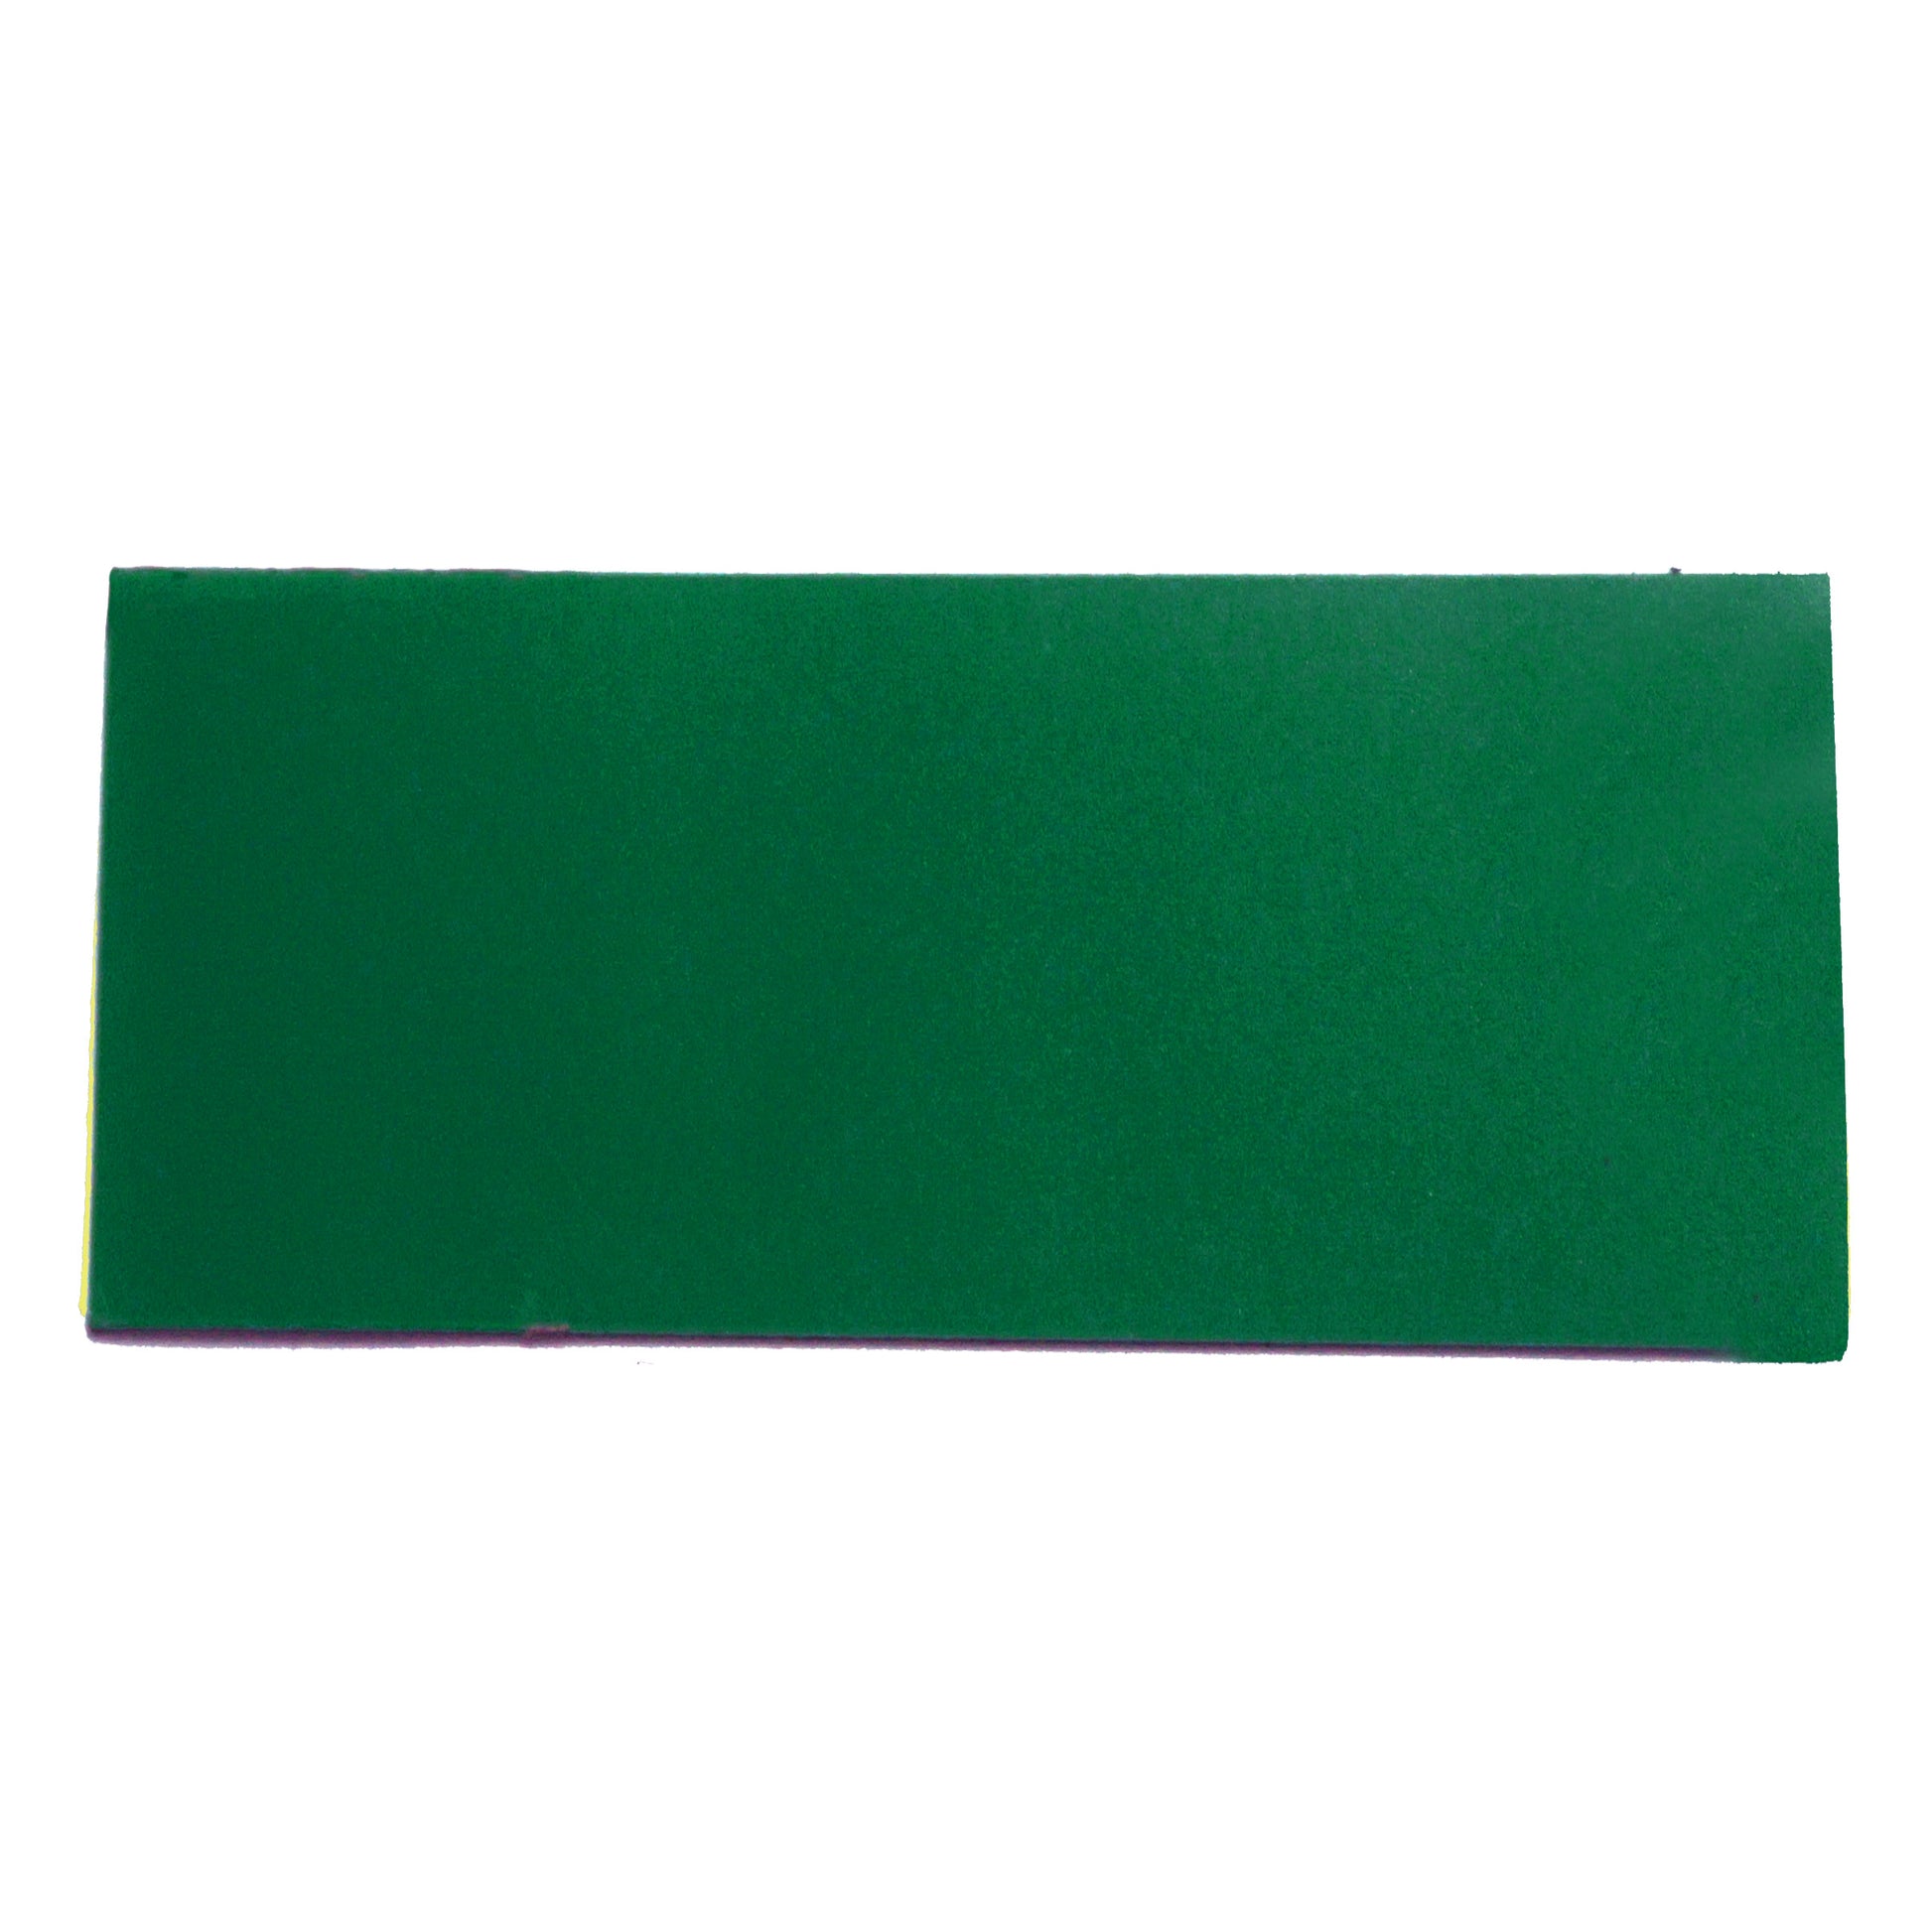 Load image into Gallery viewer, ZGN03080GR/WKS50 Magnetic Labeling Strip with Green Vinyl Surface - Bottom View